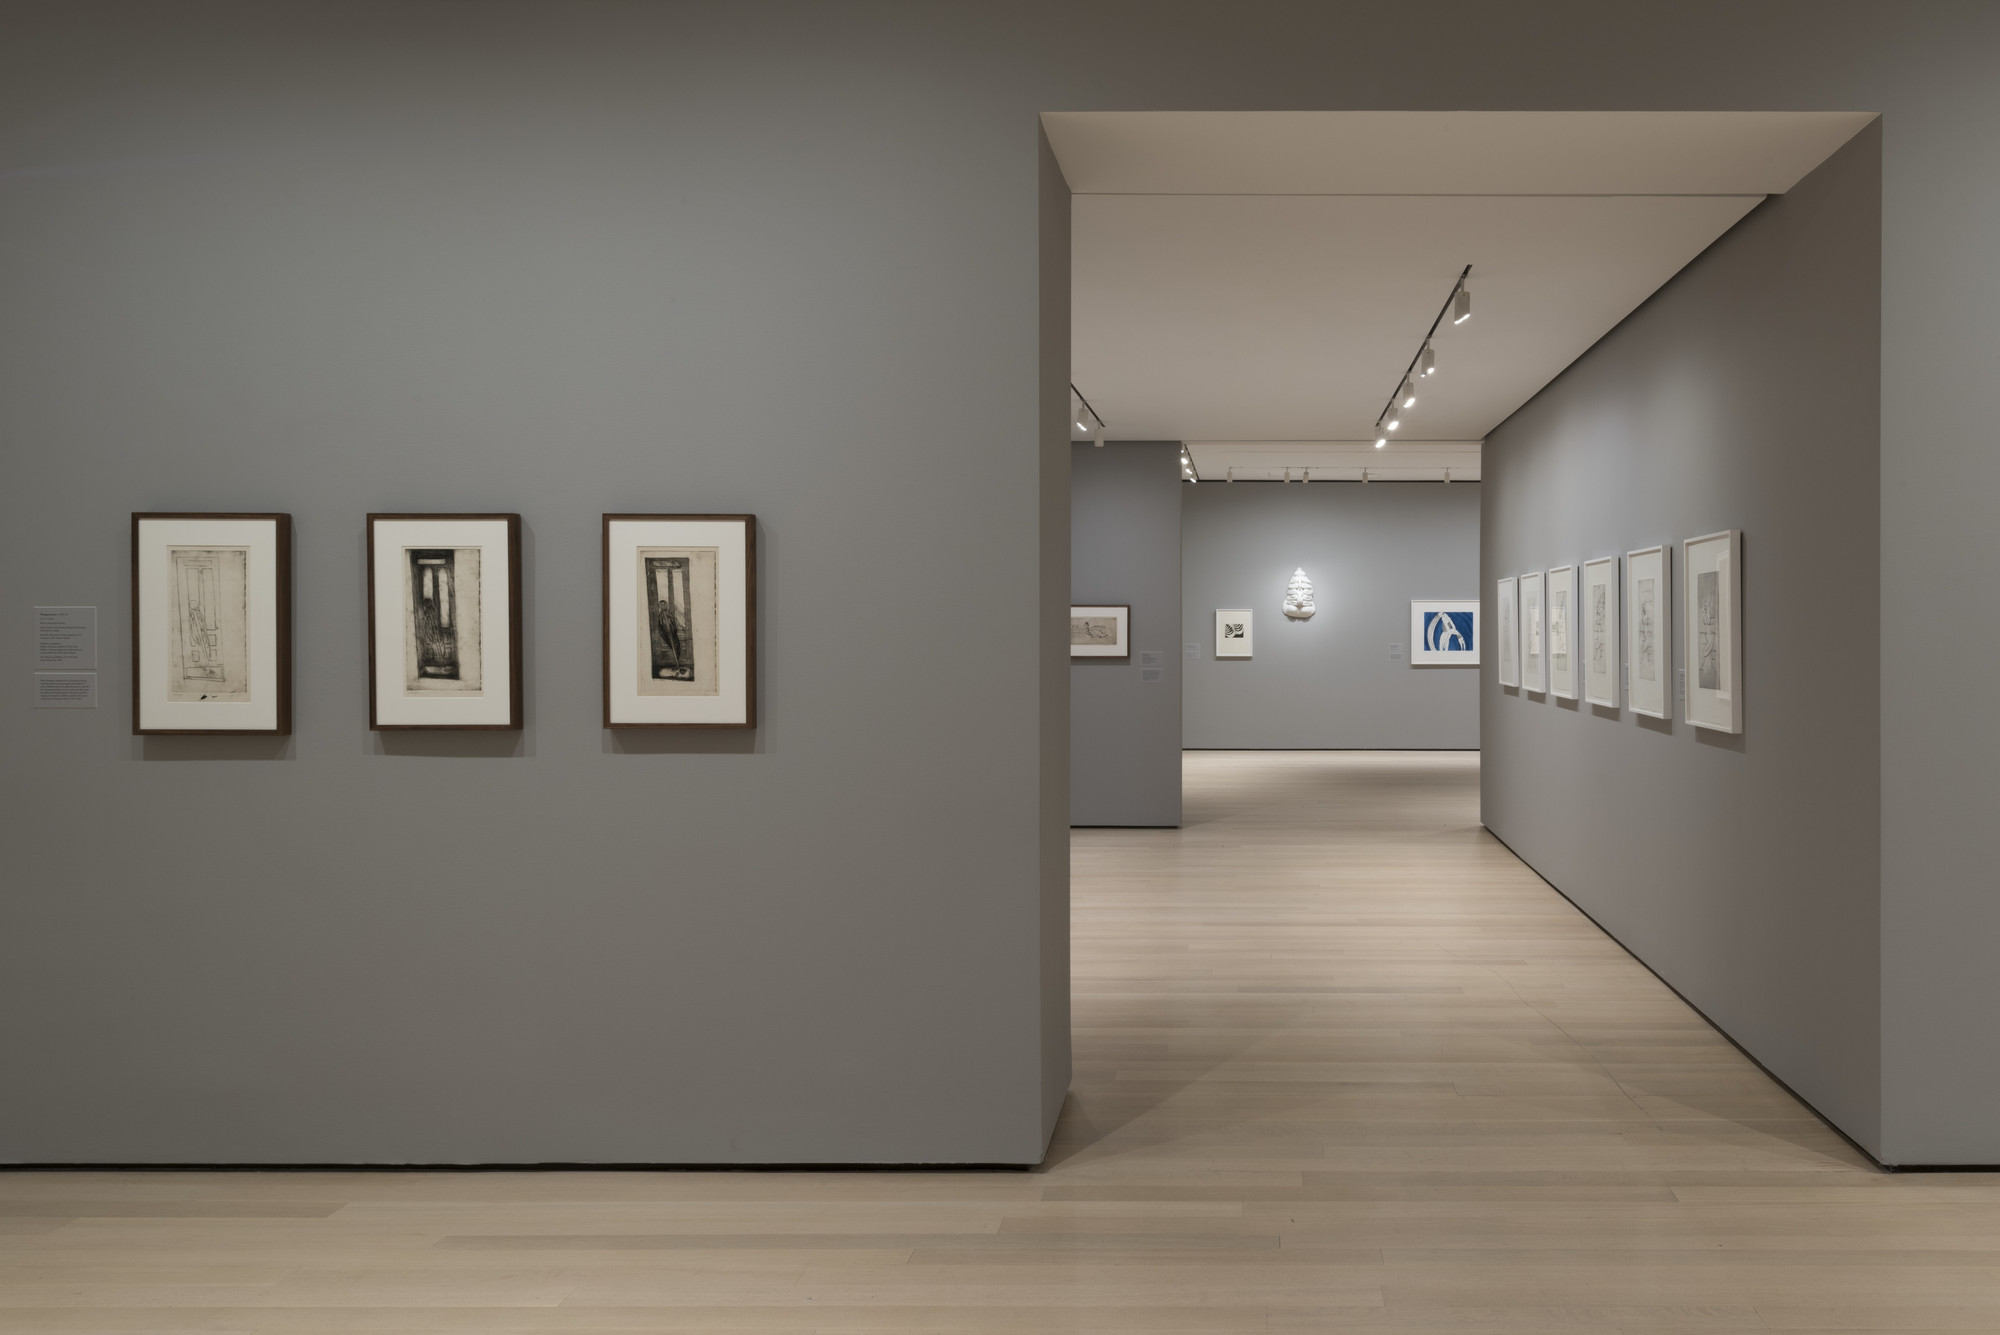 Photos: 'Louise Bourgeois: An Unfolding Portrait' at MoMA